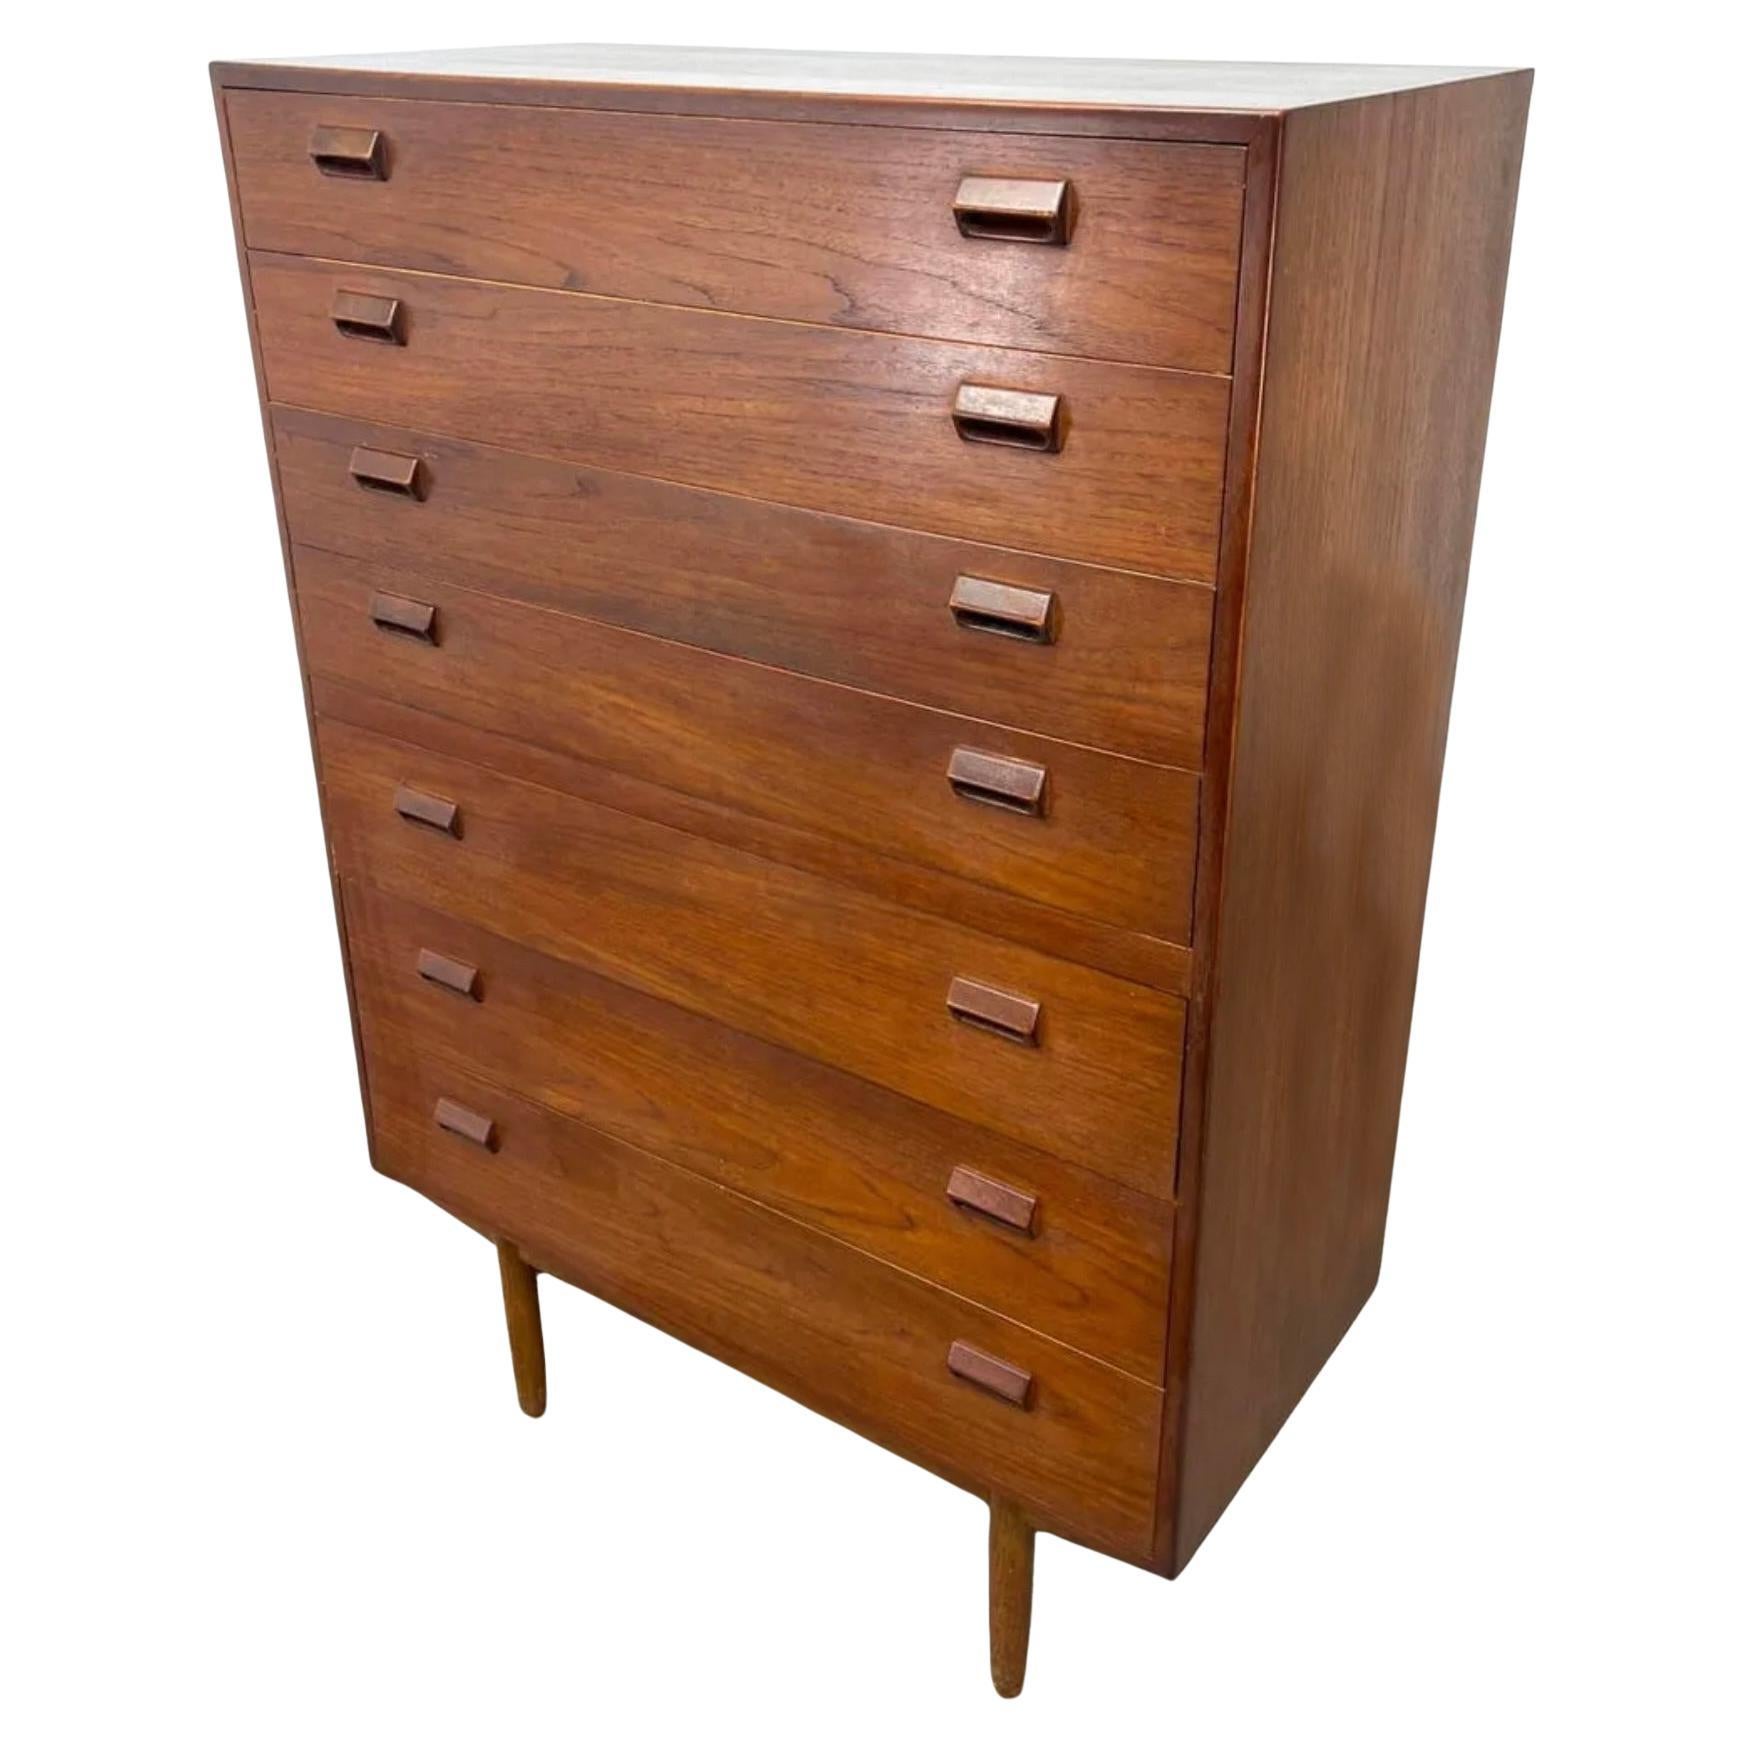 Mid century Danish modern Borge Mogensen for Soborg Mobler of Denmark Tall 7 drawer Dresser. Beautiful teak dresser - with 7 drawers with carved teak handles. Good vintage condition all drawers slide smooth. Made in Denmark Located in Brooklyn